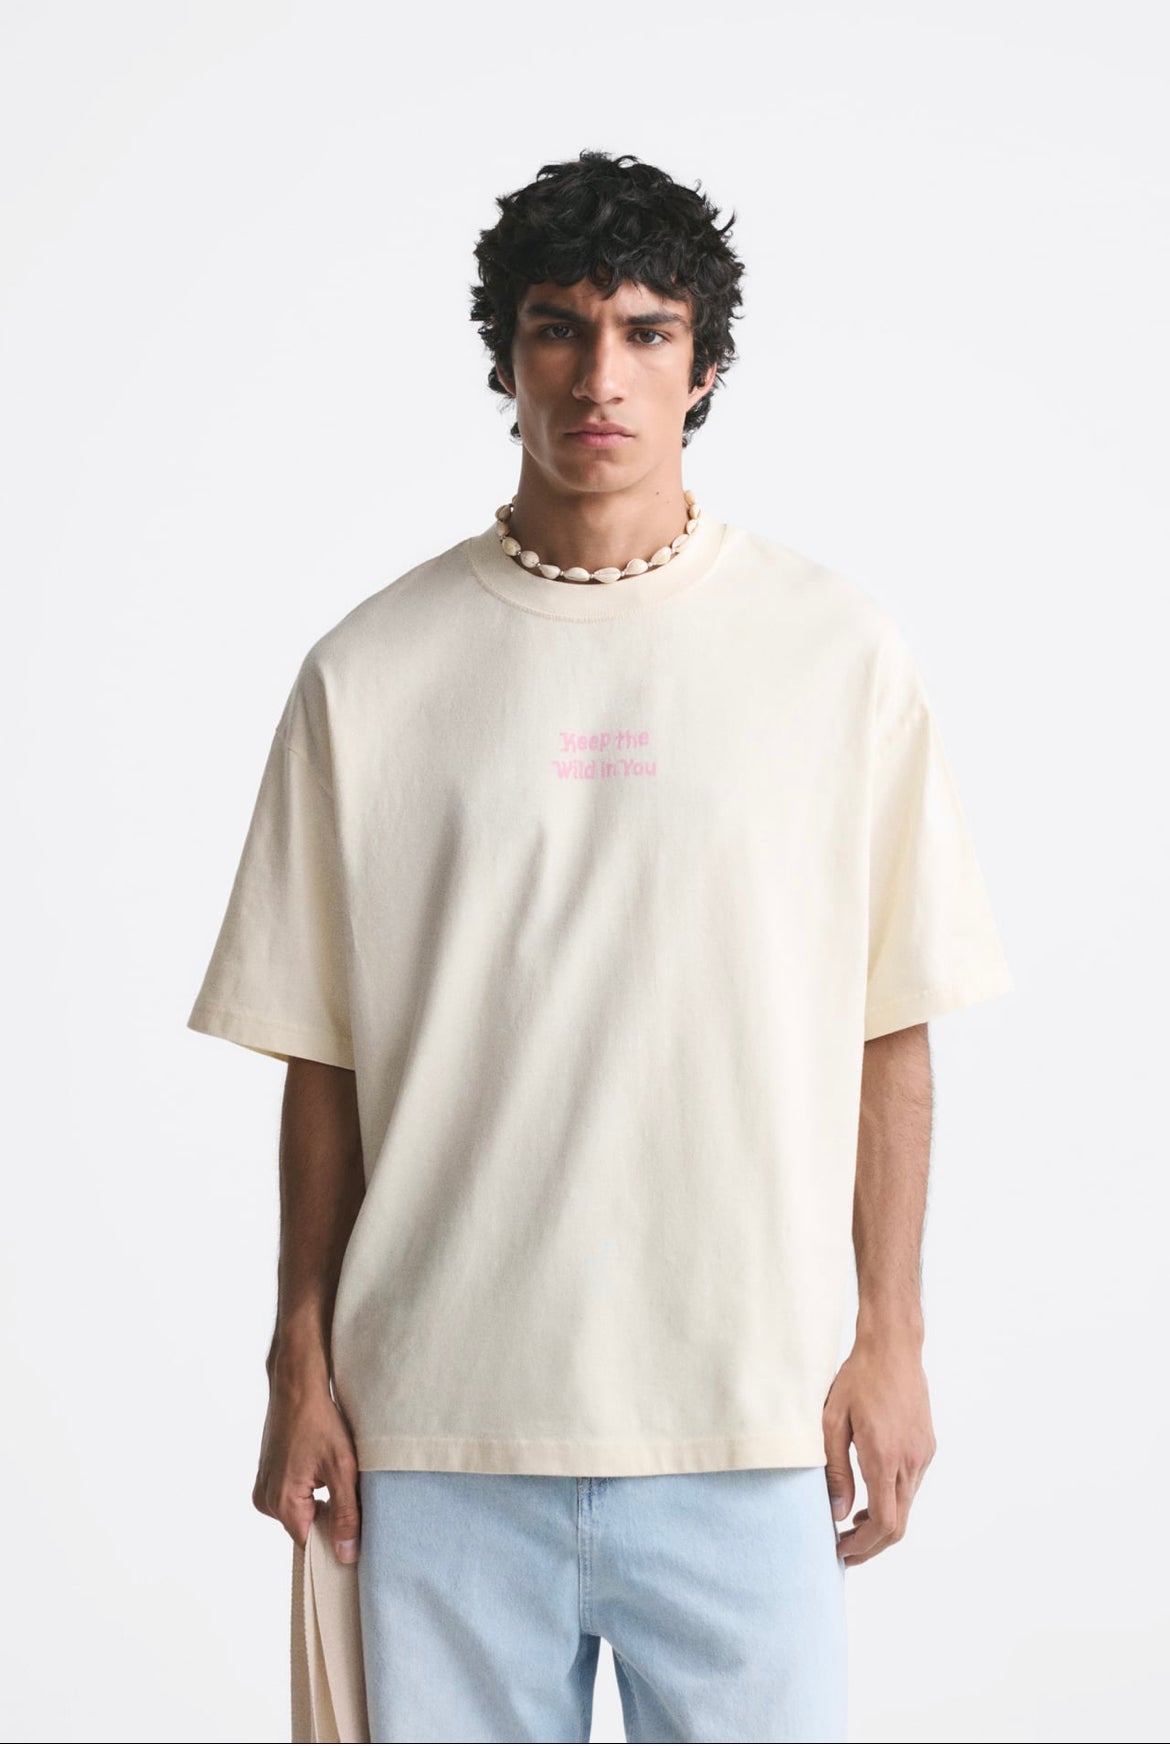 ZARA CONTRAST PRINTED T-SHIRT IN OYSTER WHITE